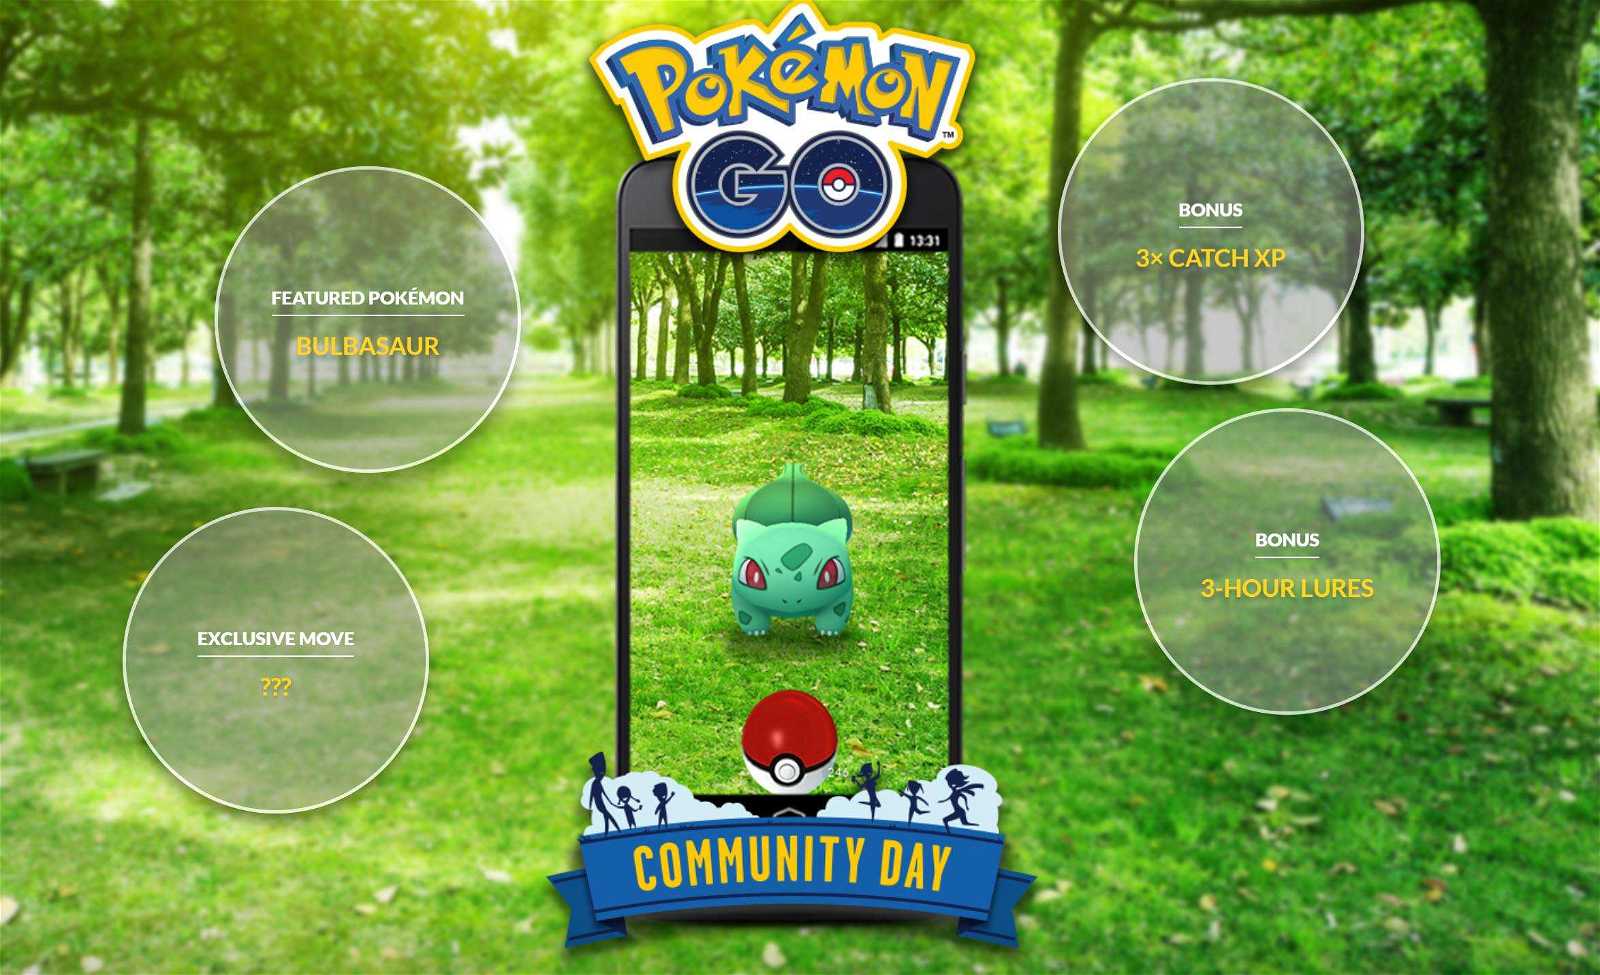 pokemon go announces a rather lackluster community day choice for its